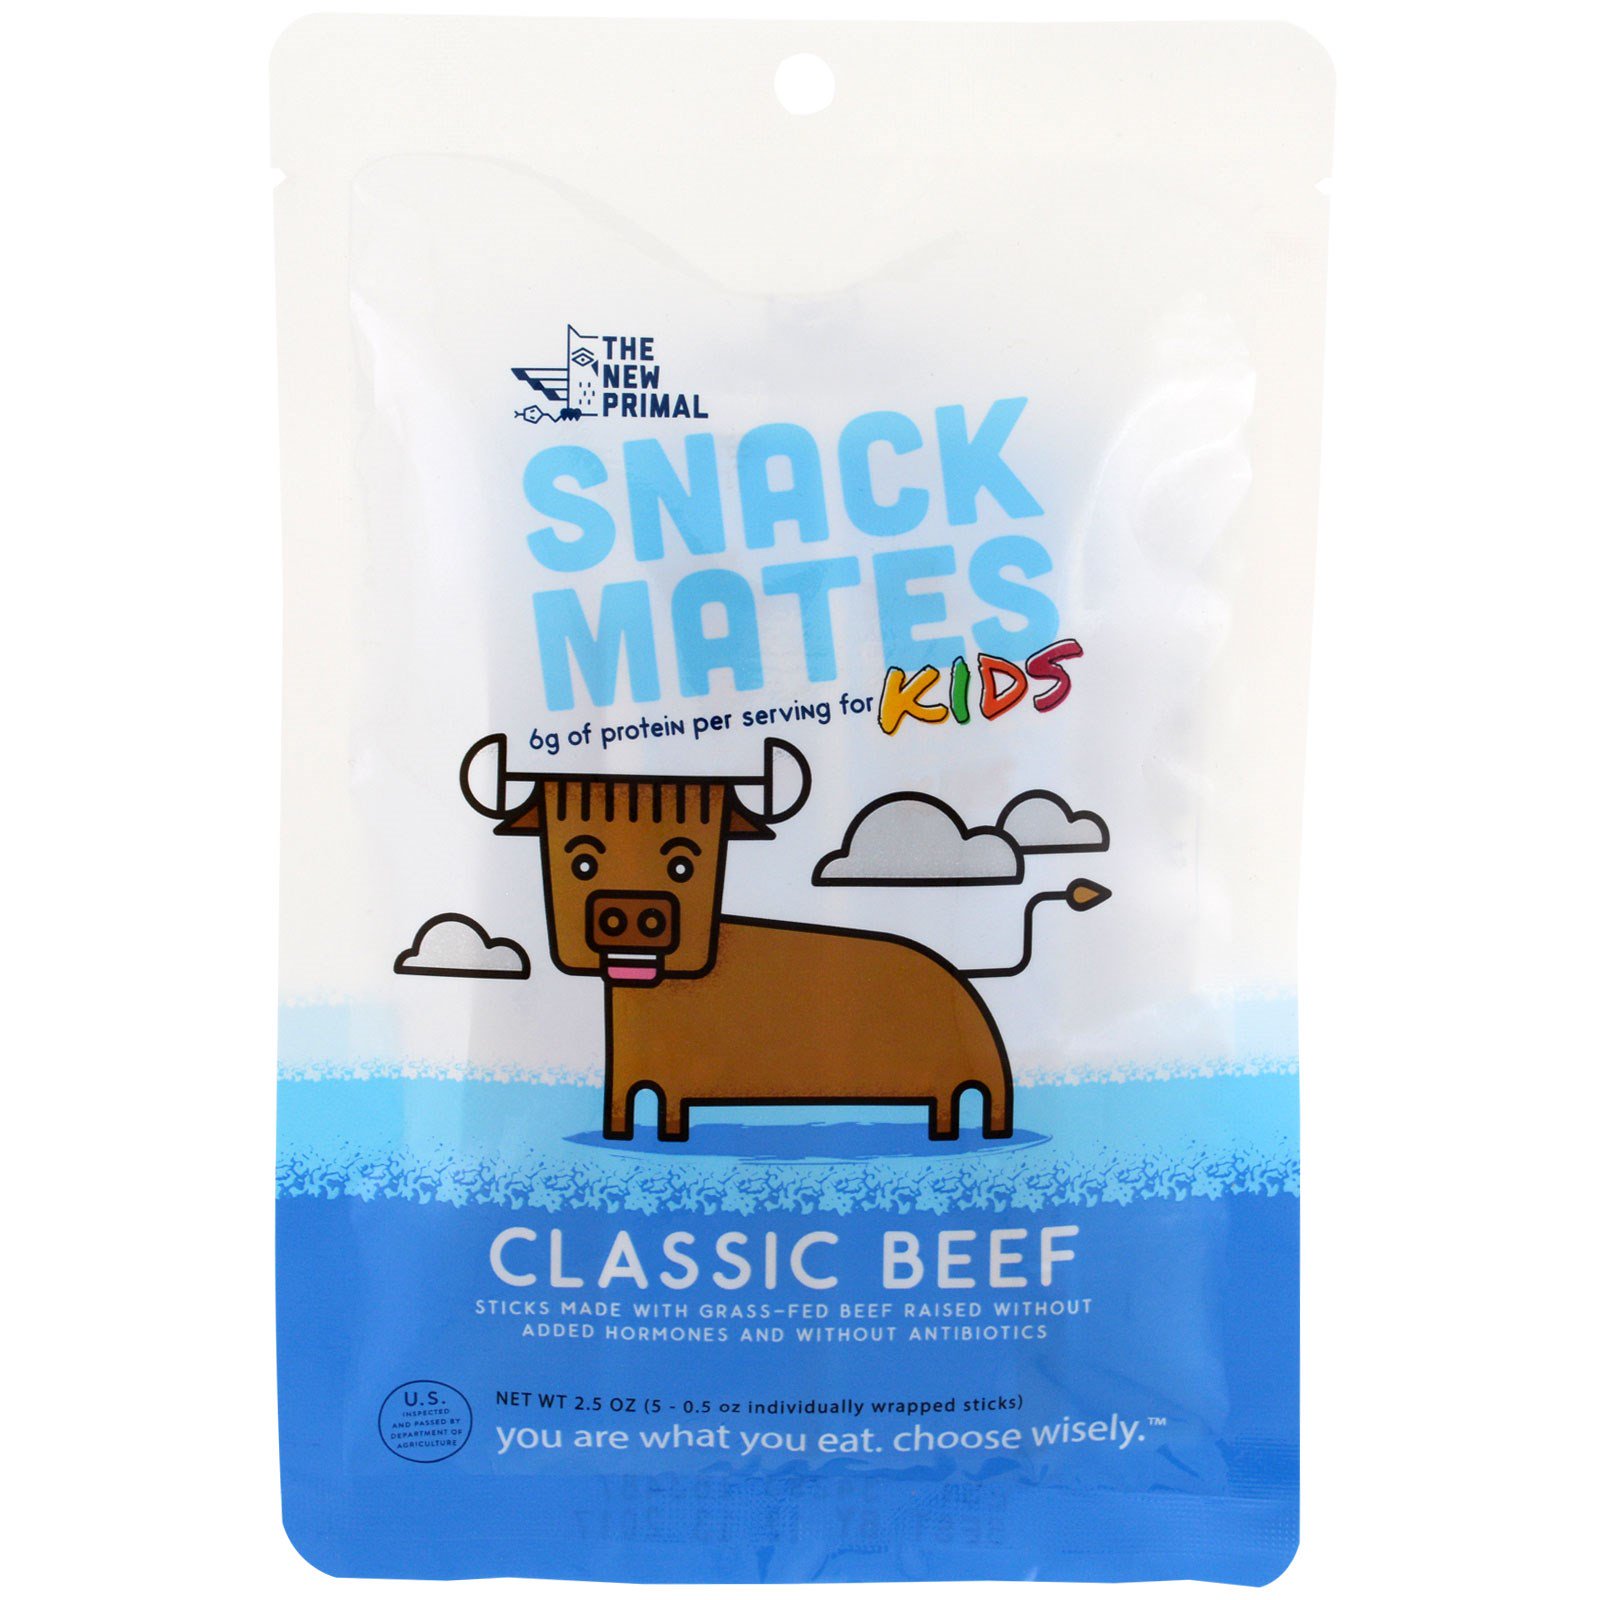 The New Primal, Snack Mates Kids, Classic Beef, 5 Sticks, 0.5 oz Each